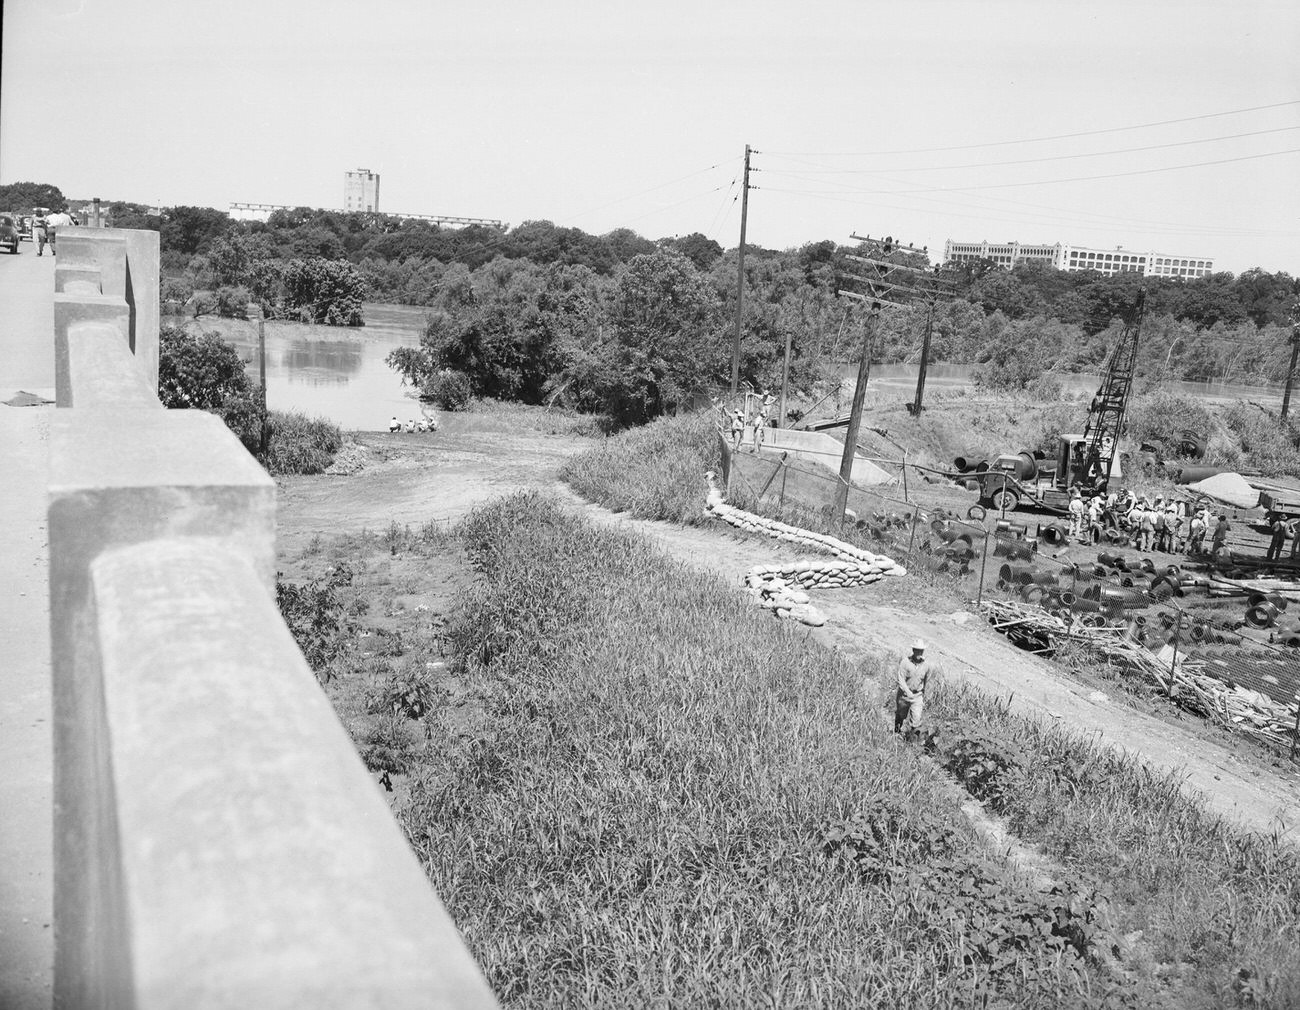 Flood damage at the gates of Fort Worth Water Works, 1949